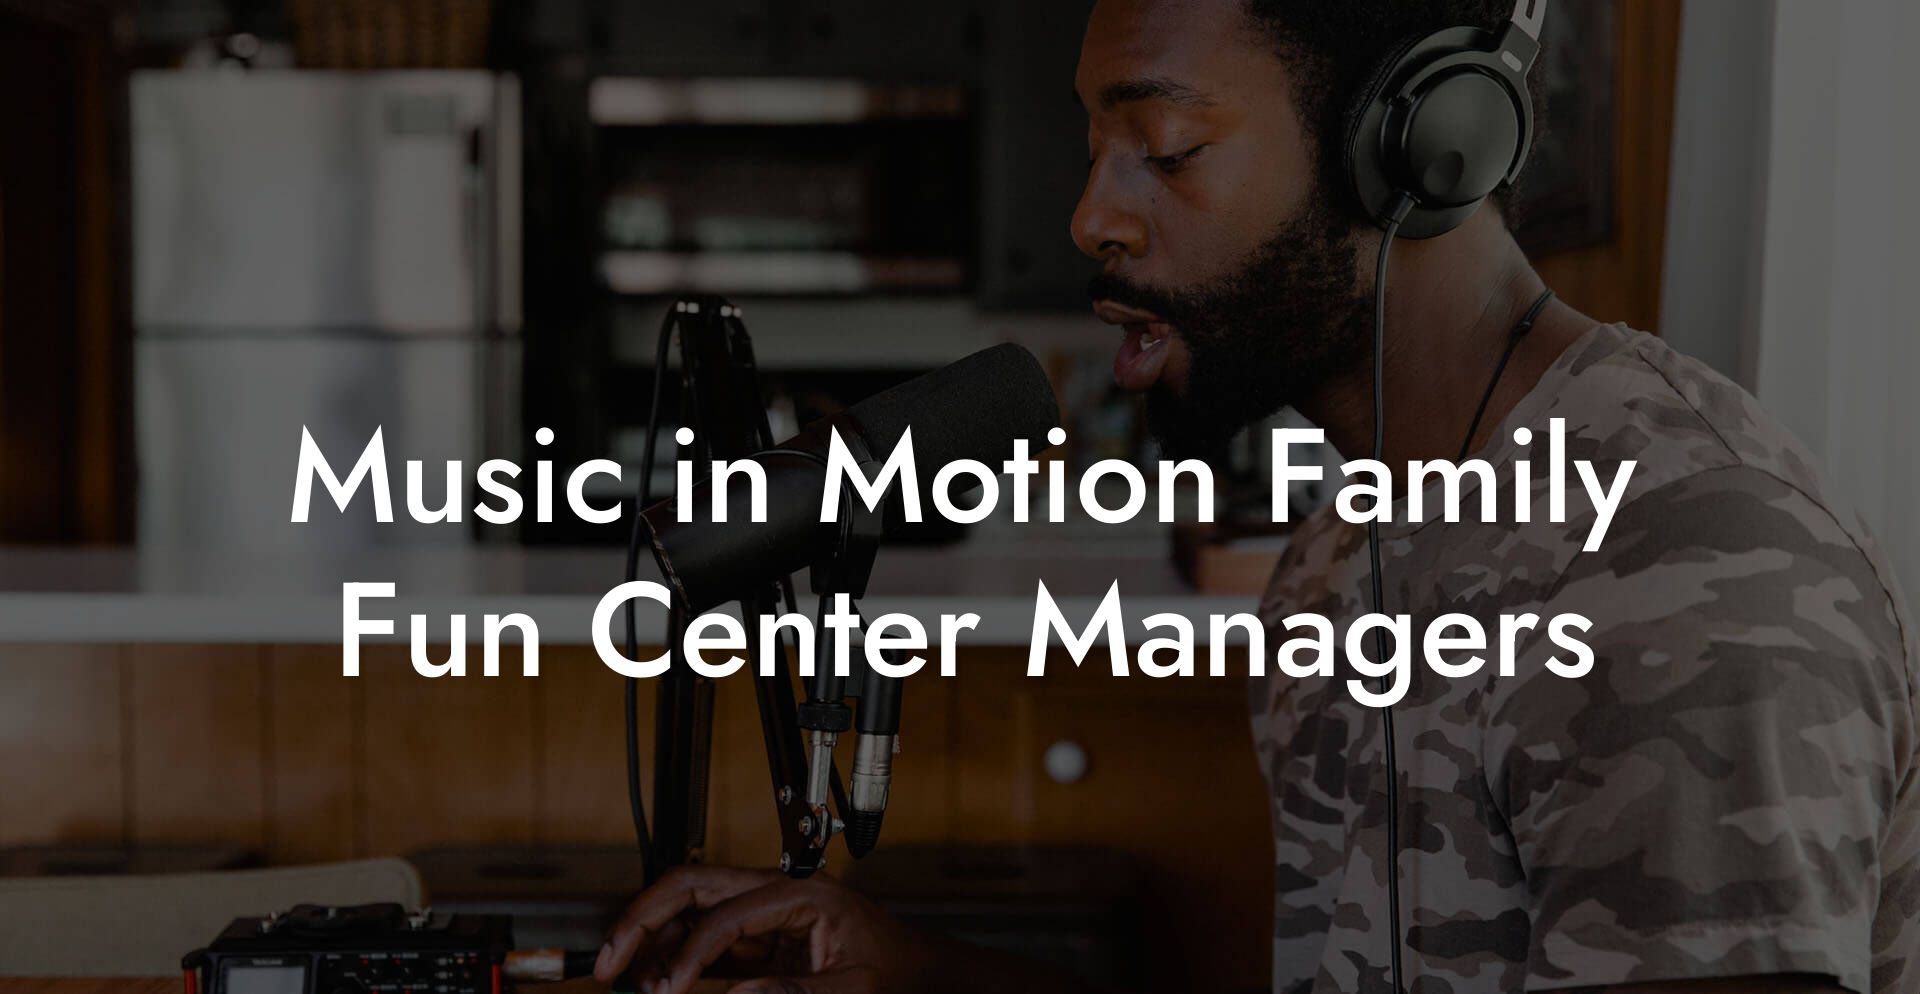 Music in Motion Family Fun Center Managers